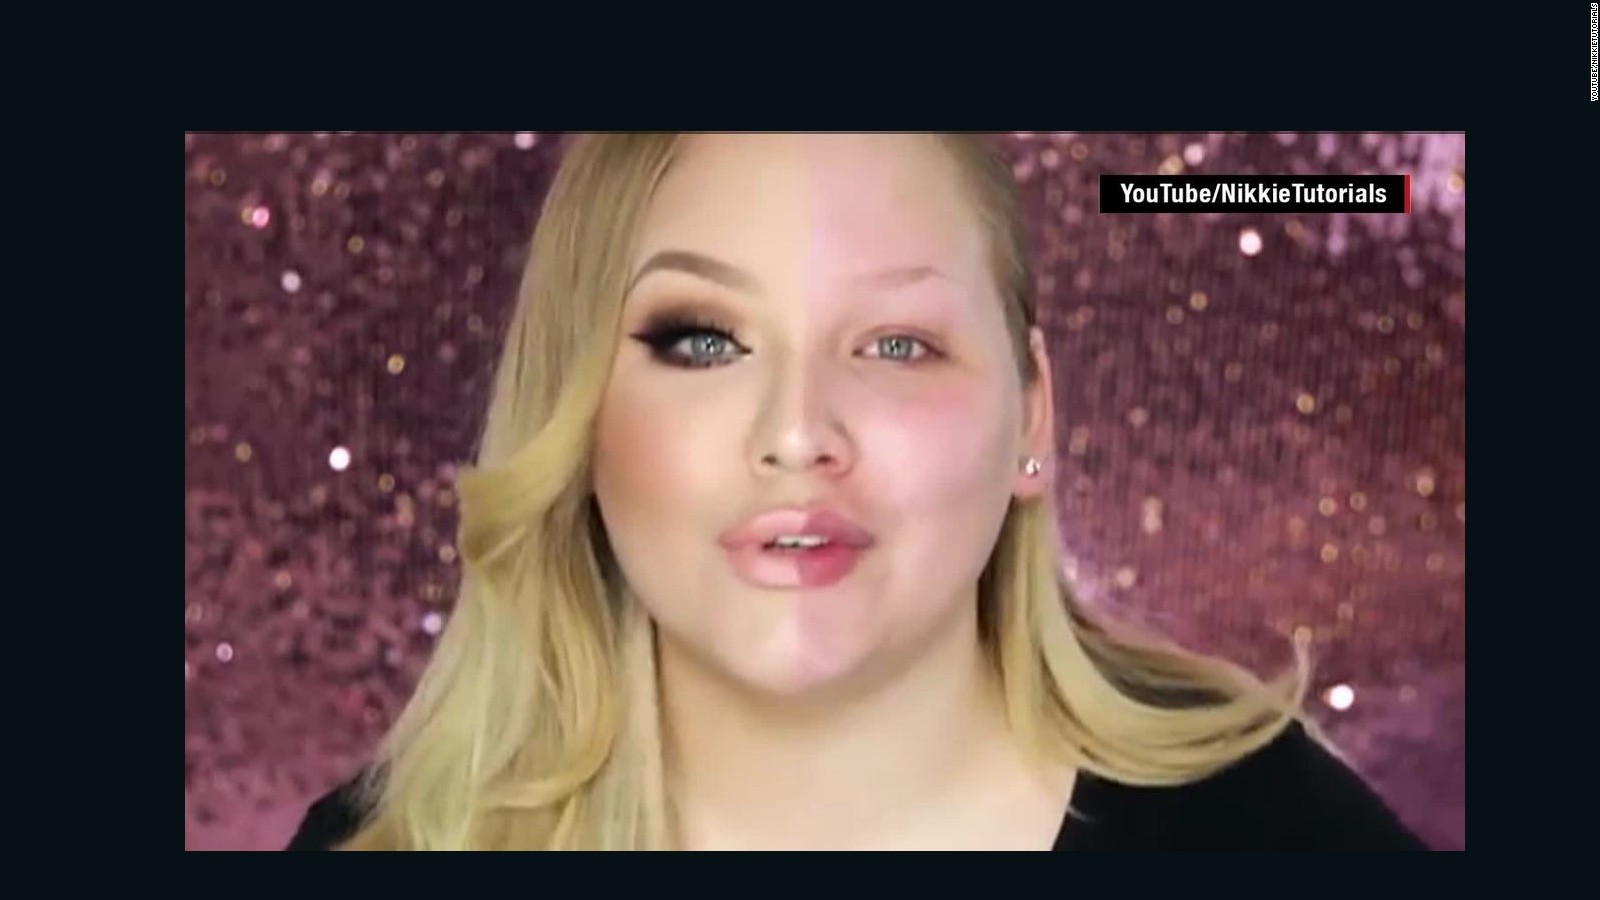 Stunning video shows the power of makeup